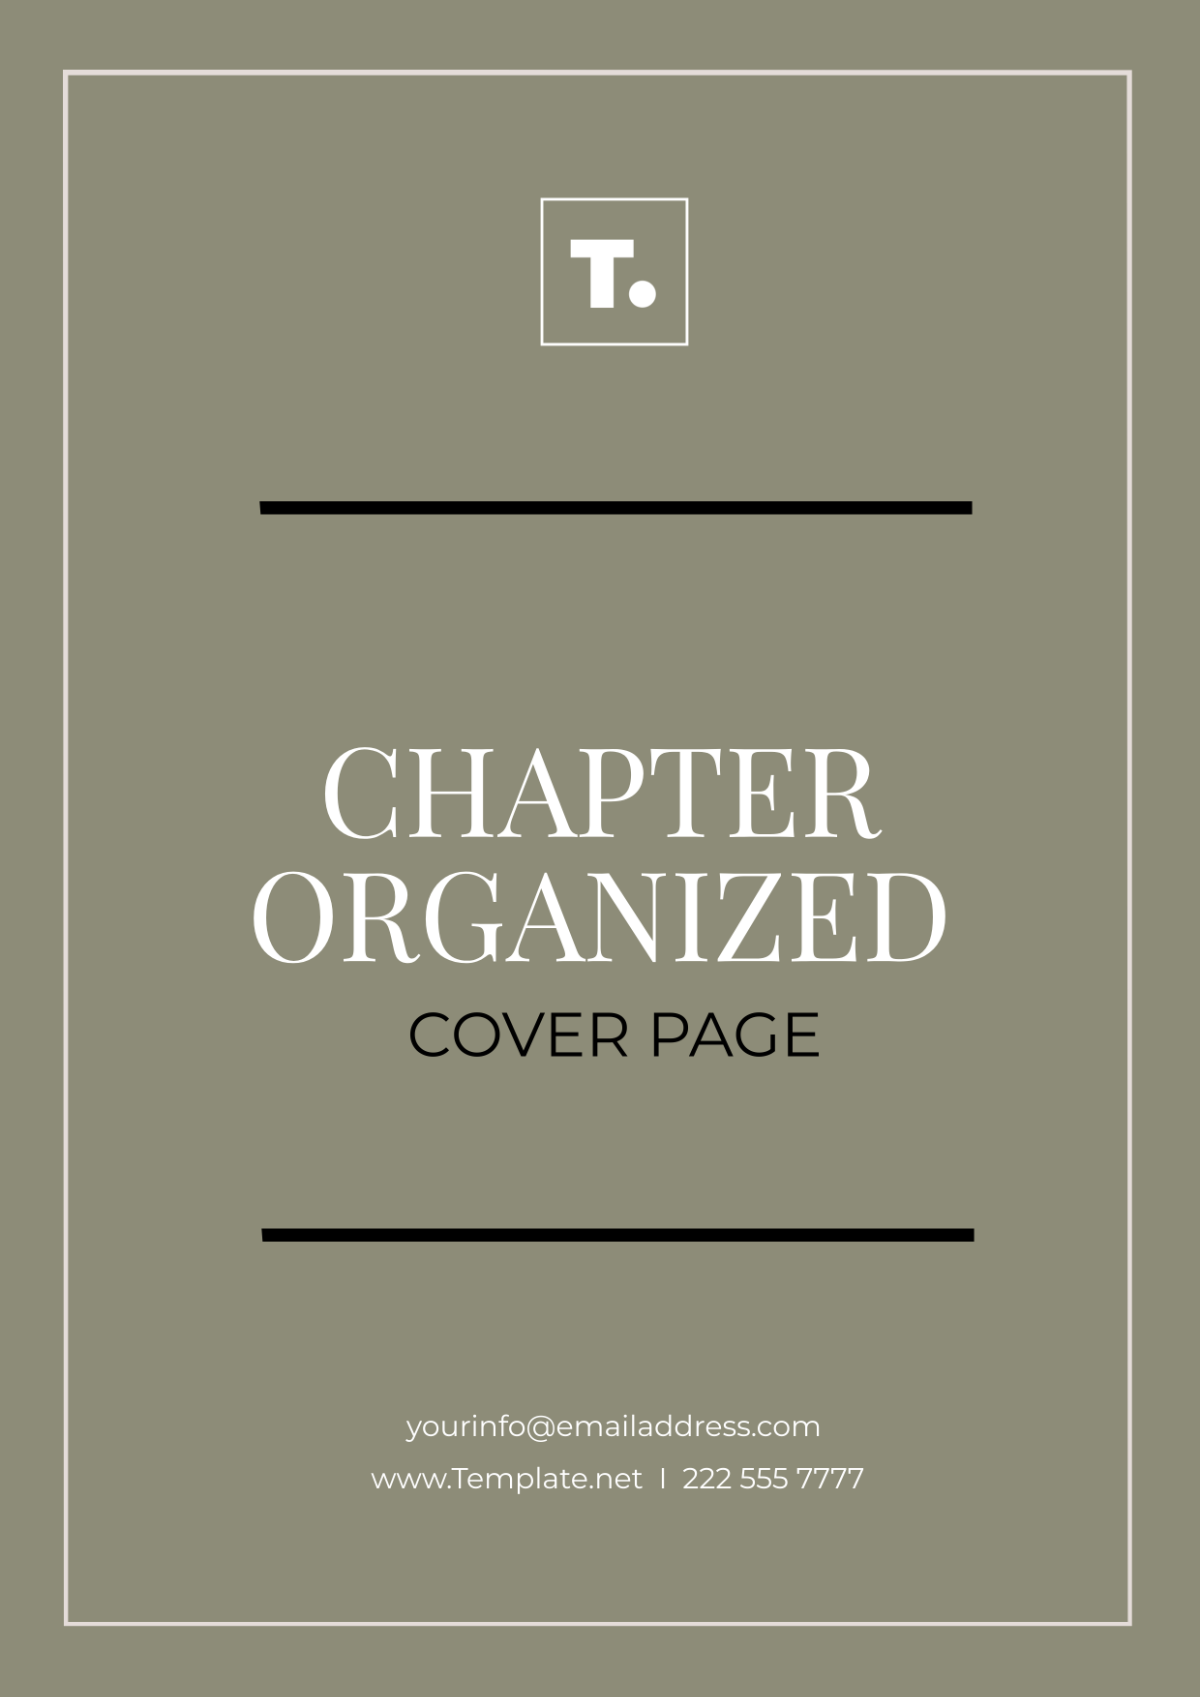 Free Chapter Organized Cover Page Template